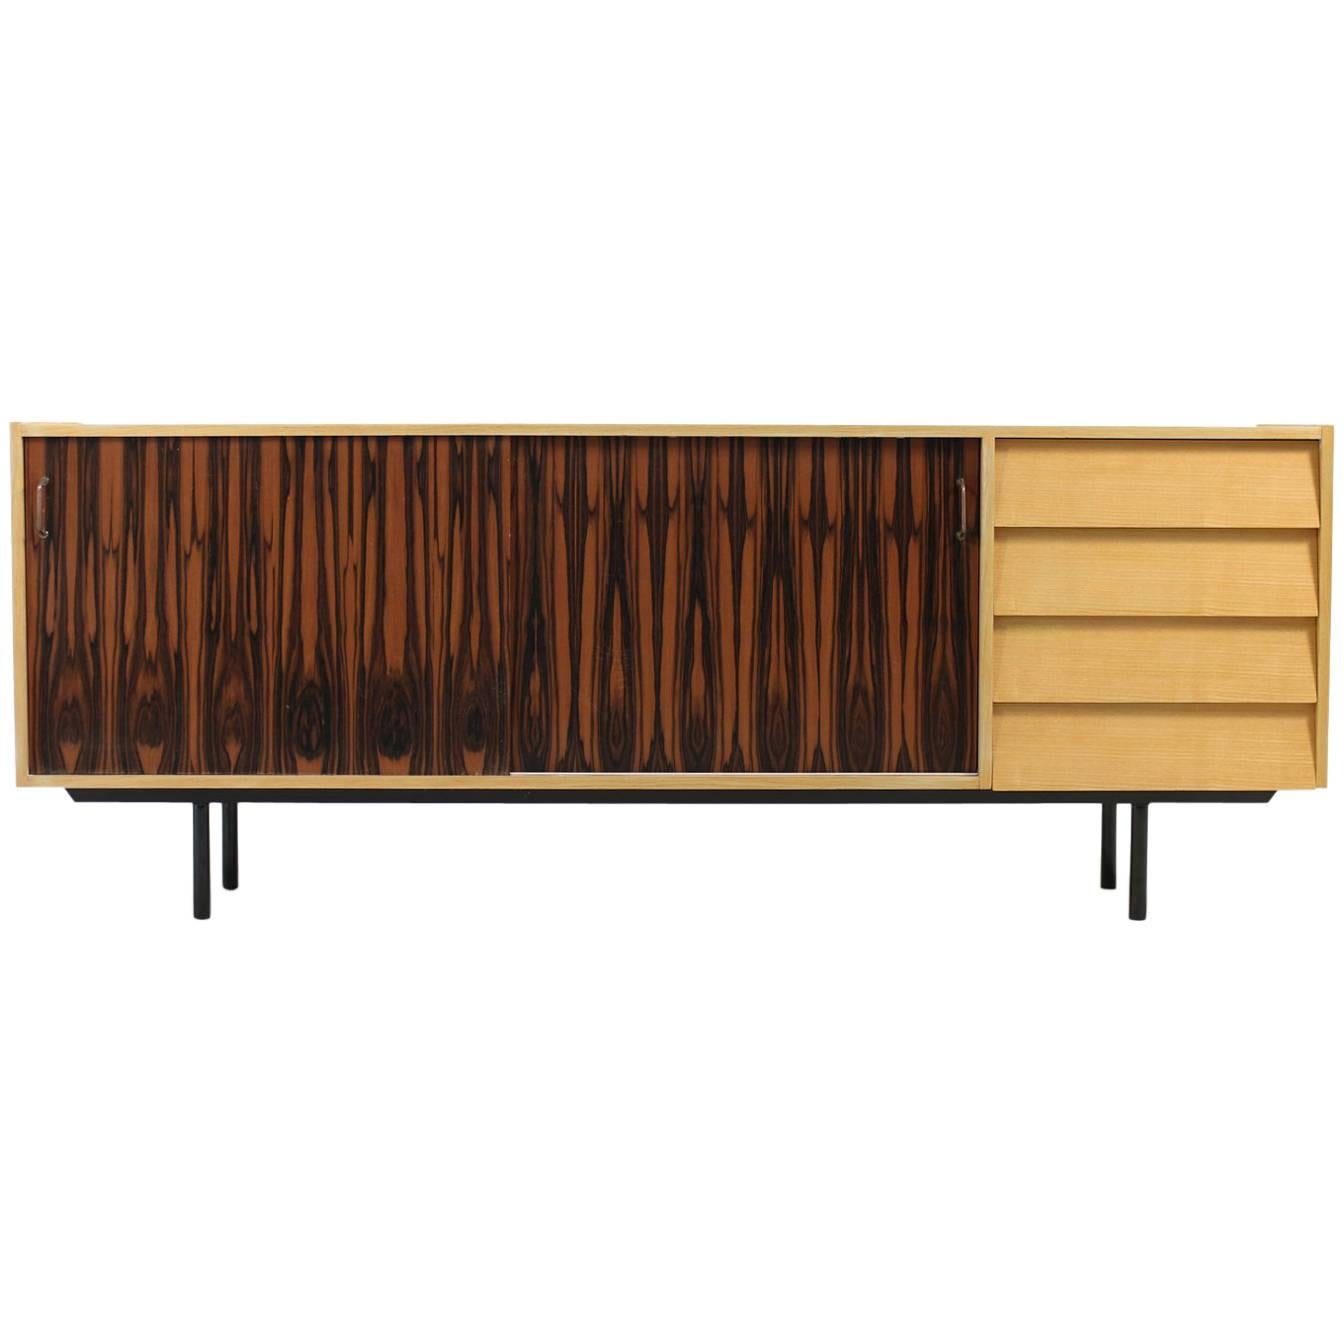 1950s Oak Sideboard Mid-Century Modern Design with Drawers Brass Handles For Sale